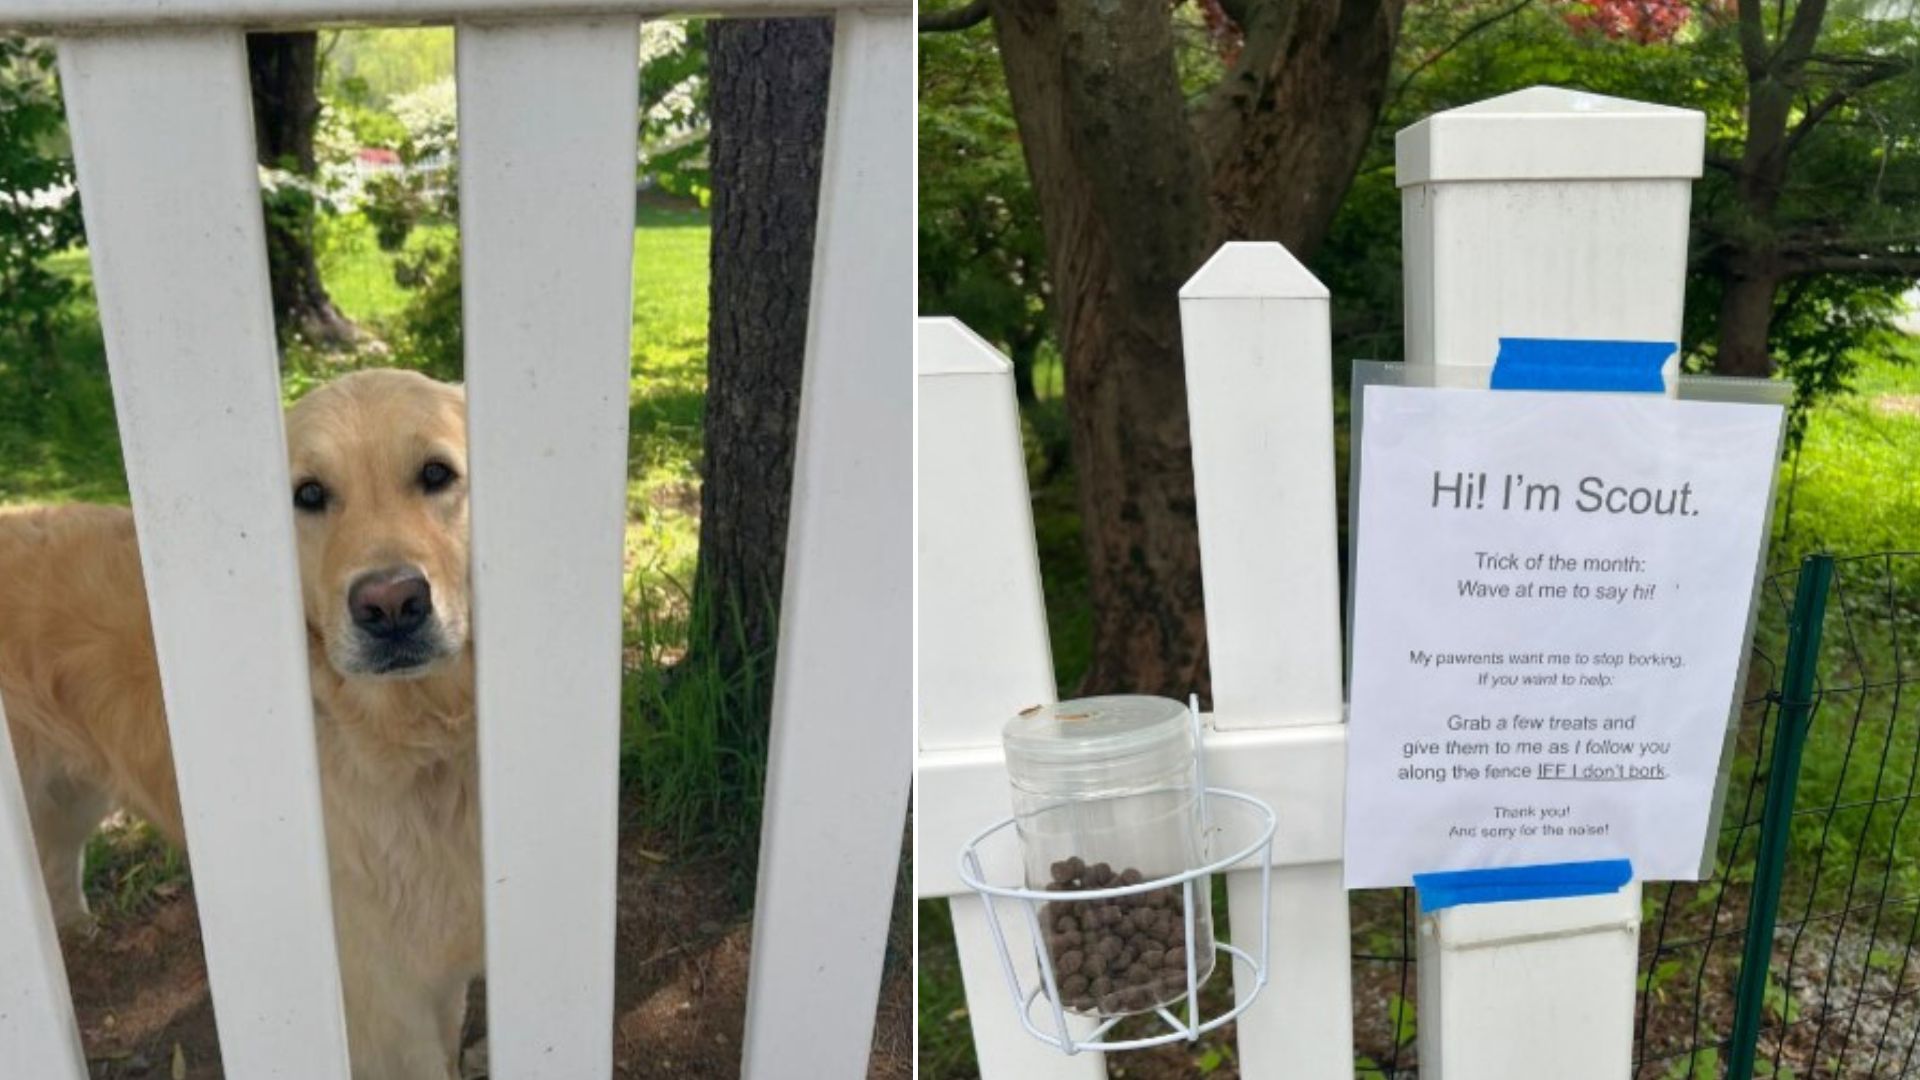 A Sign Posted By The Owners Directs People To Give Their Dog Treats If He Follows One Rule